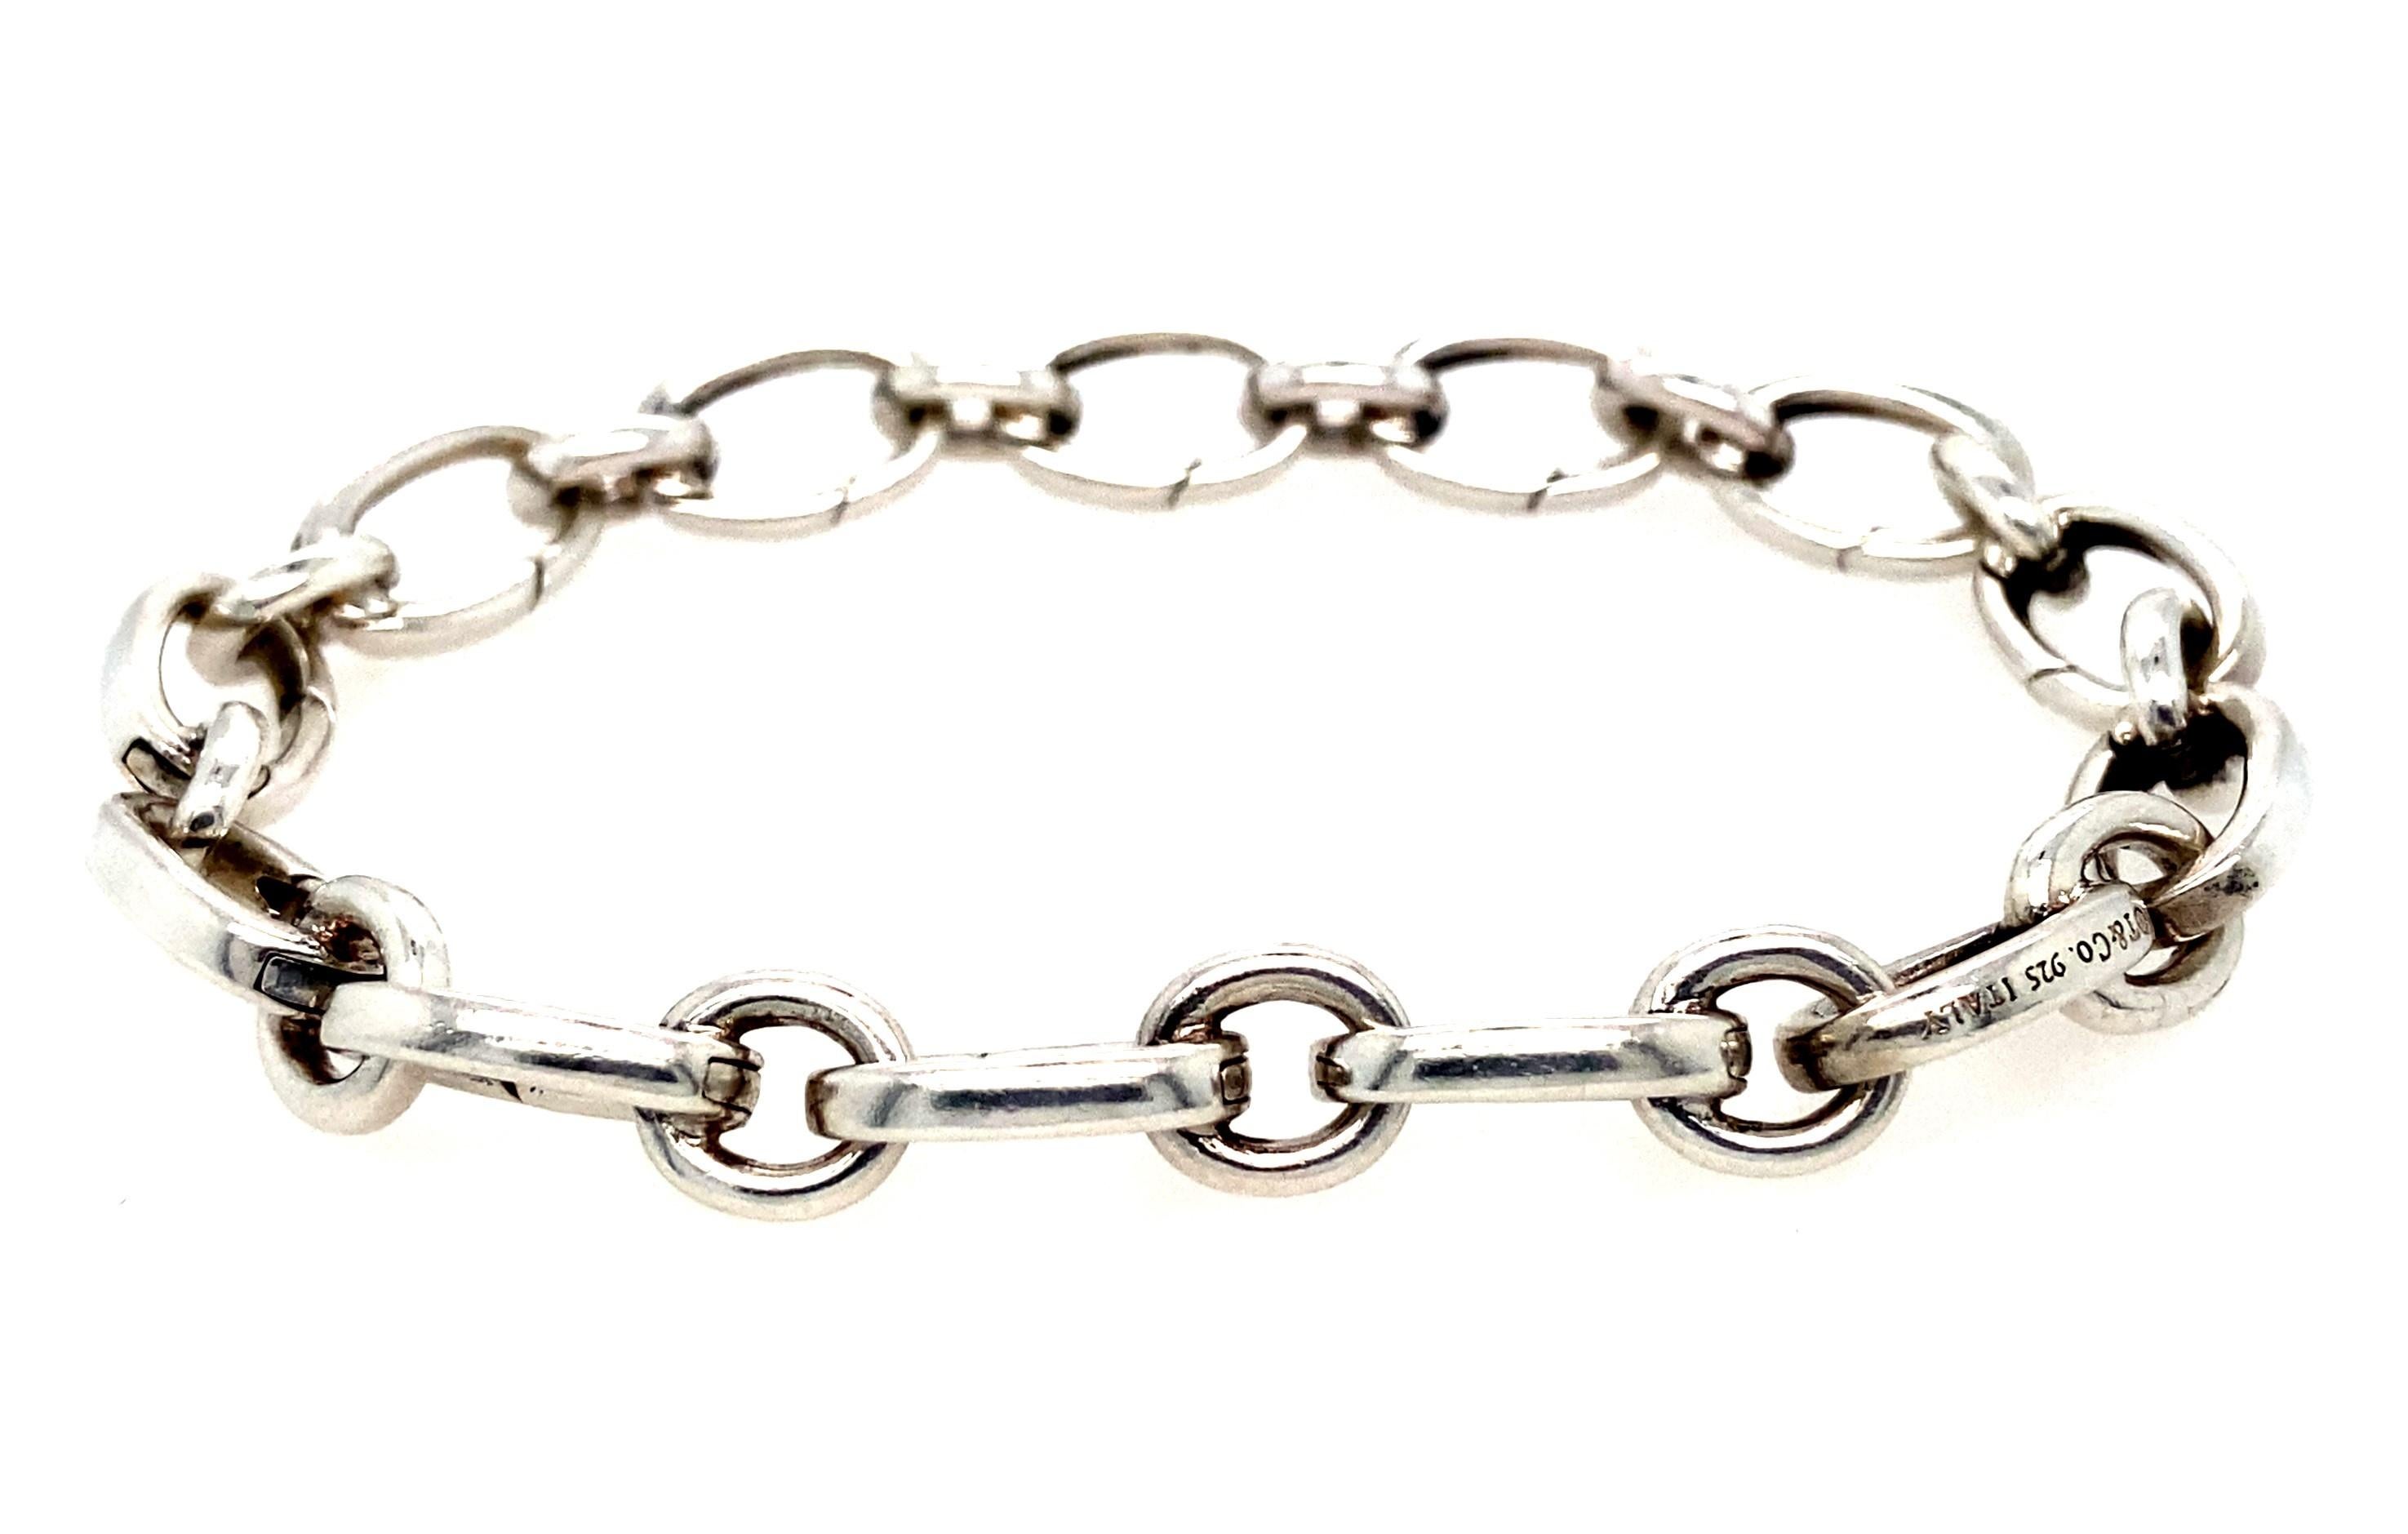 Extremely versatile and effortlessly classic, this Tiffany chain bracelet looks wonderful on the wrist on its own or would make an excellent charm bracelet. Each oval link opens with a spring hinge, so attaching charms is easy, and it can be taken